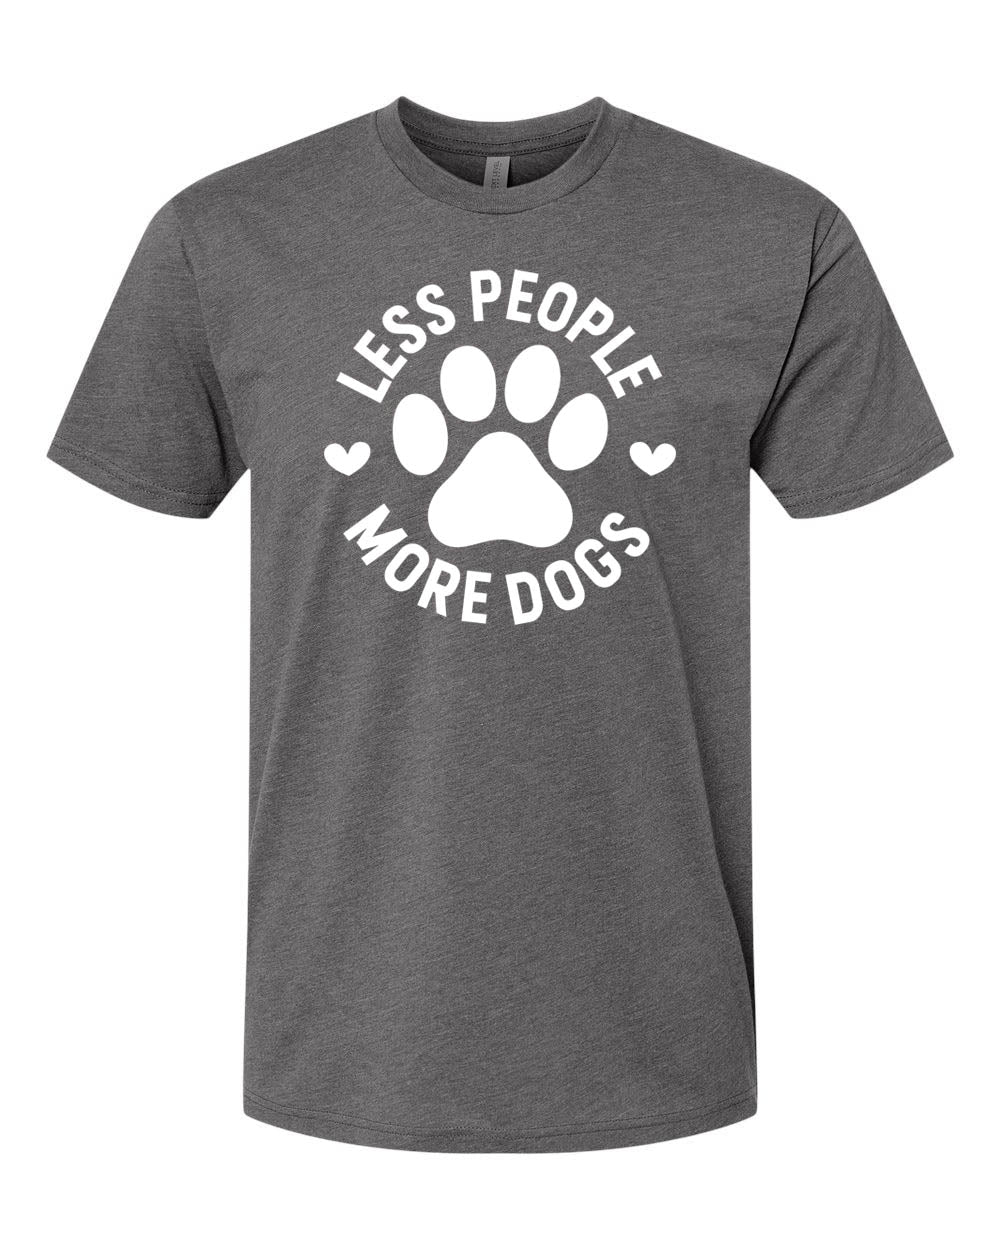 More dogs less people T-Shirt